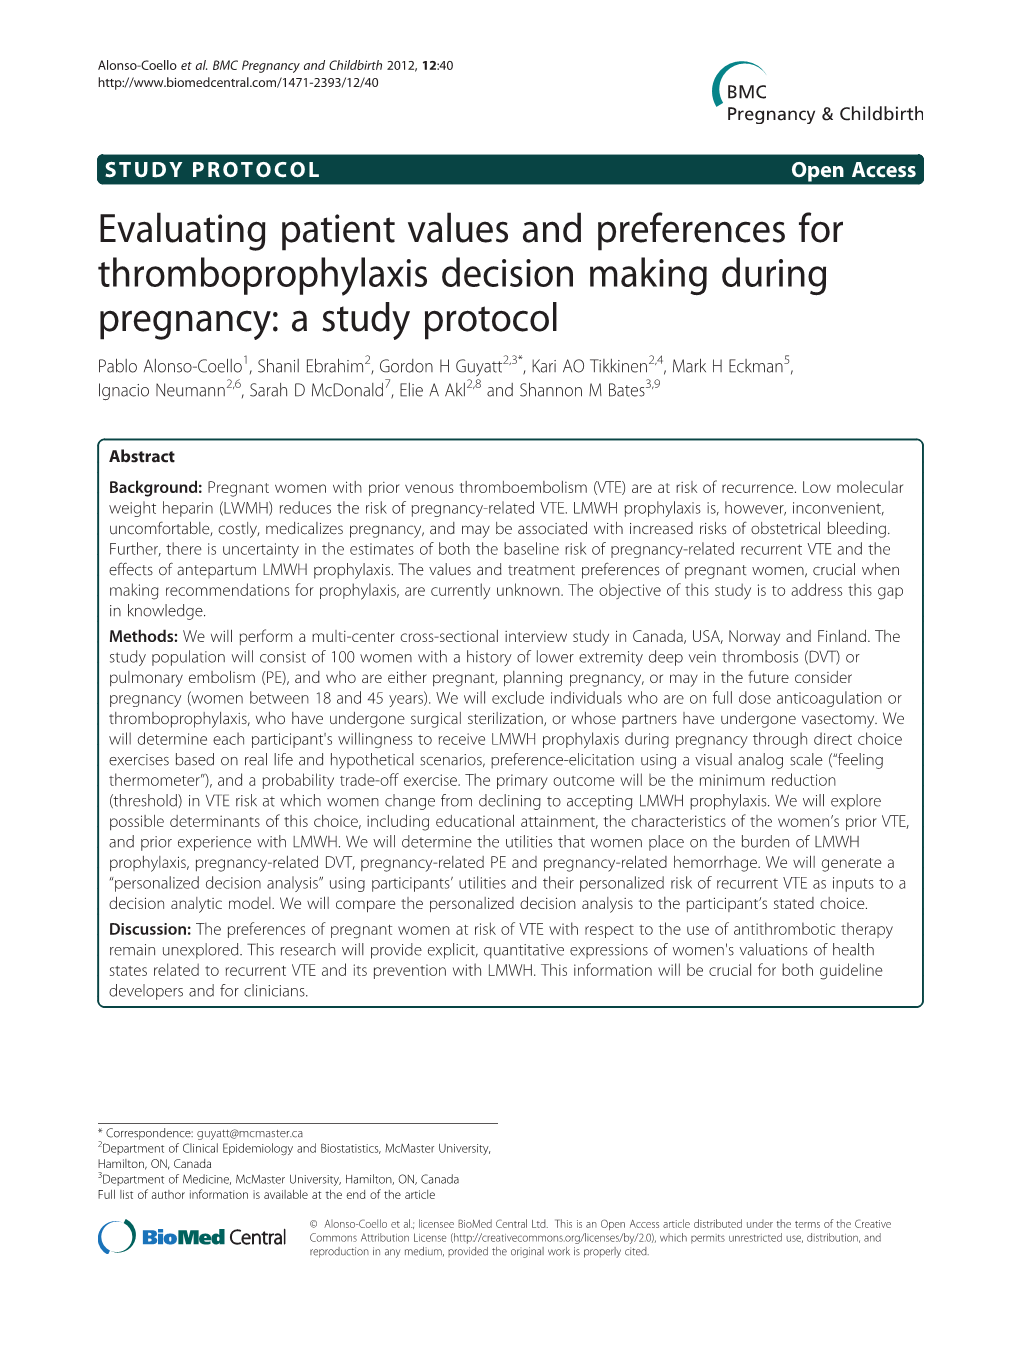 Evaluating Patient Values and Preferences for Thromboprophylaxis